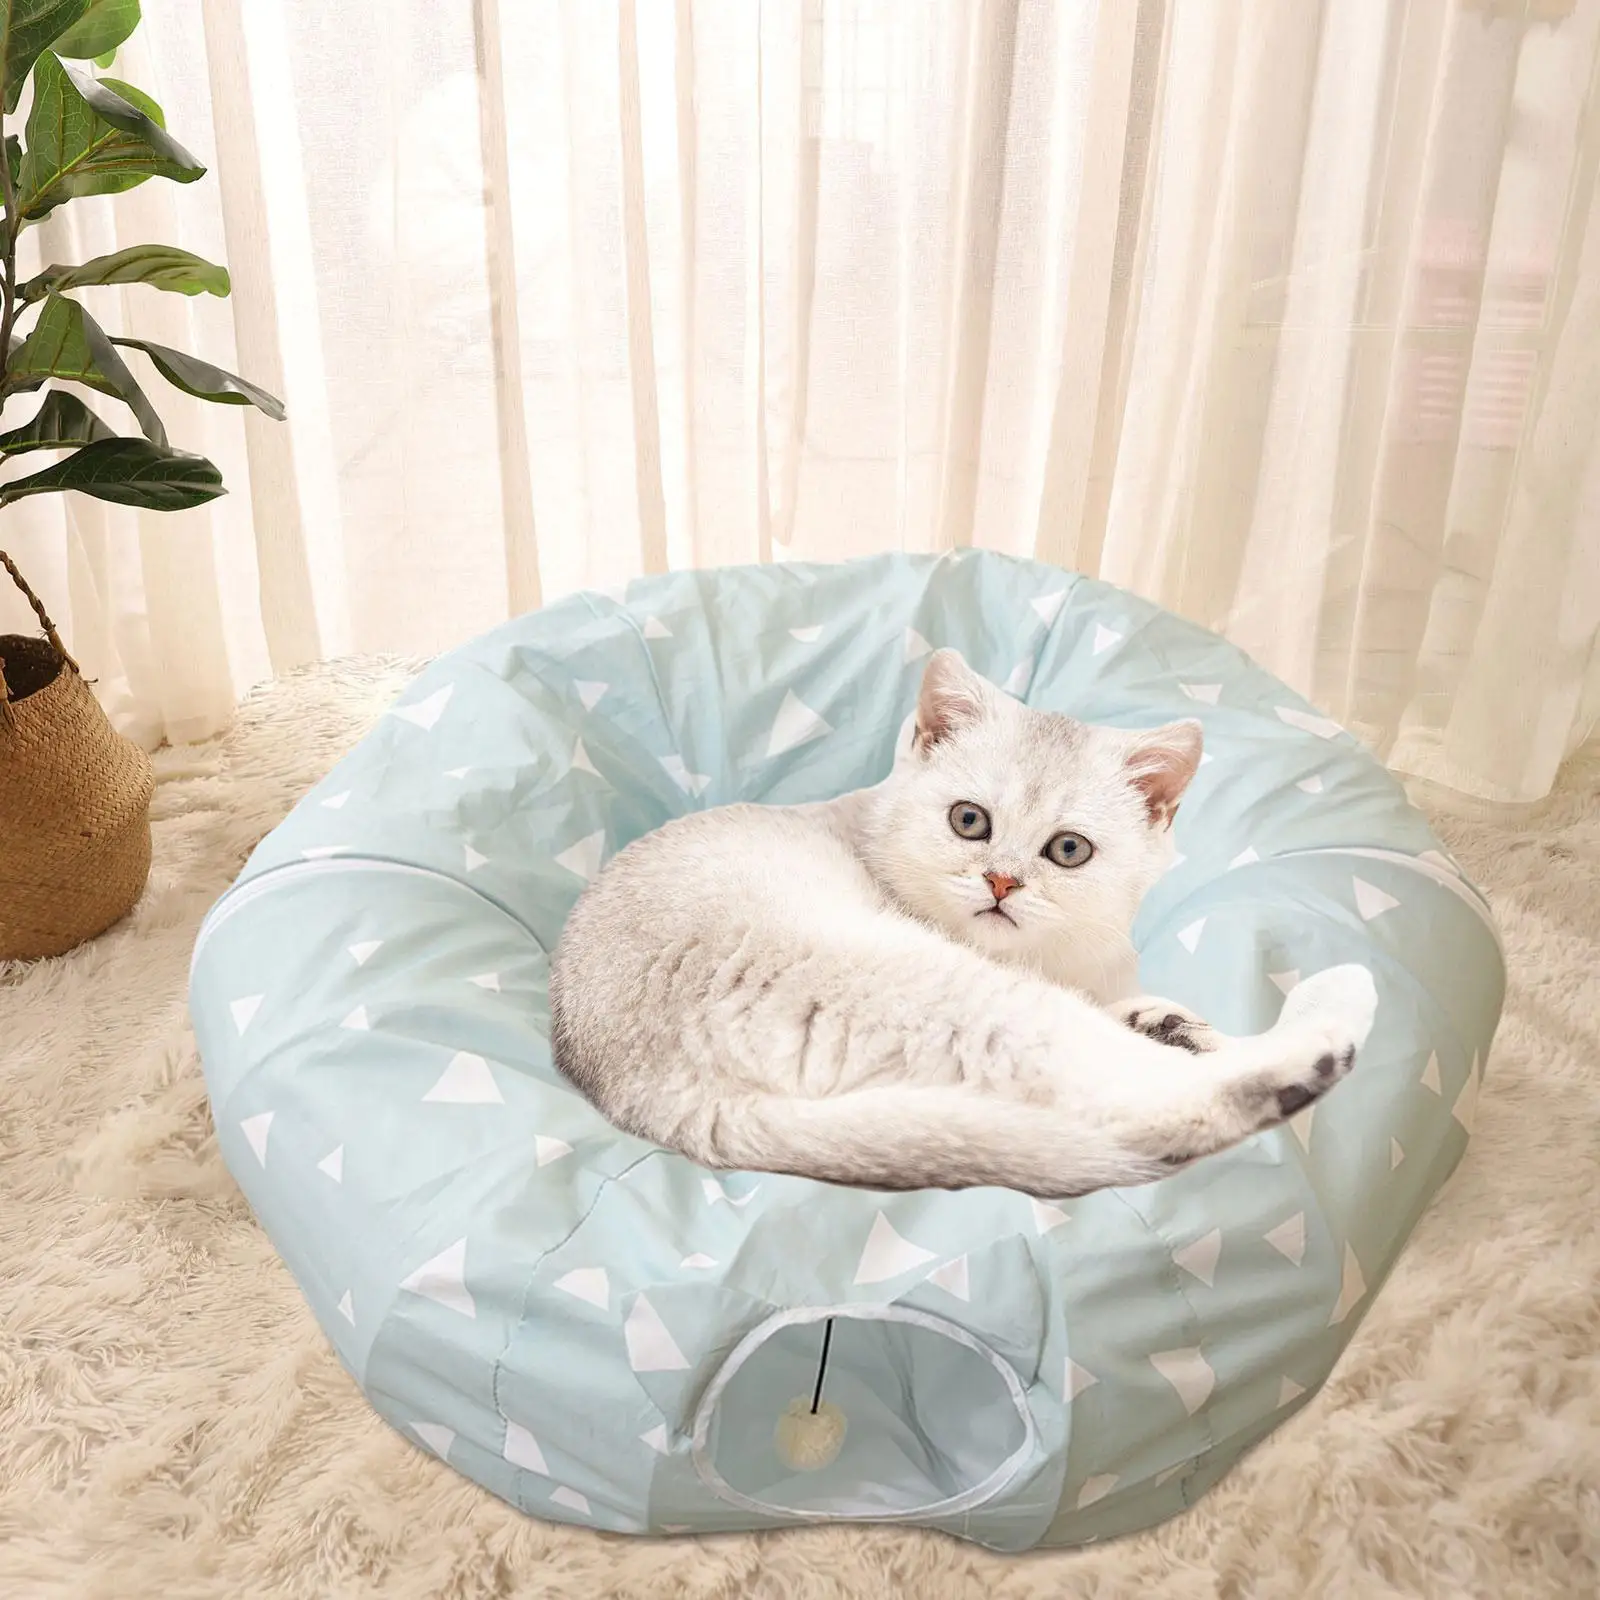 Cat Tunnel Bed Collapsible Comfortable Exercise Portable Pet Cat Bed for Kitten Rabbit Bunny Indoor Cats Small Animals Kitten